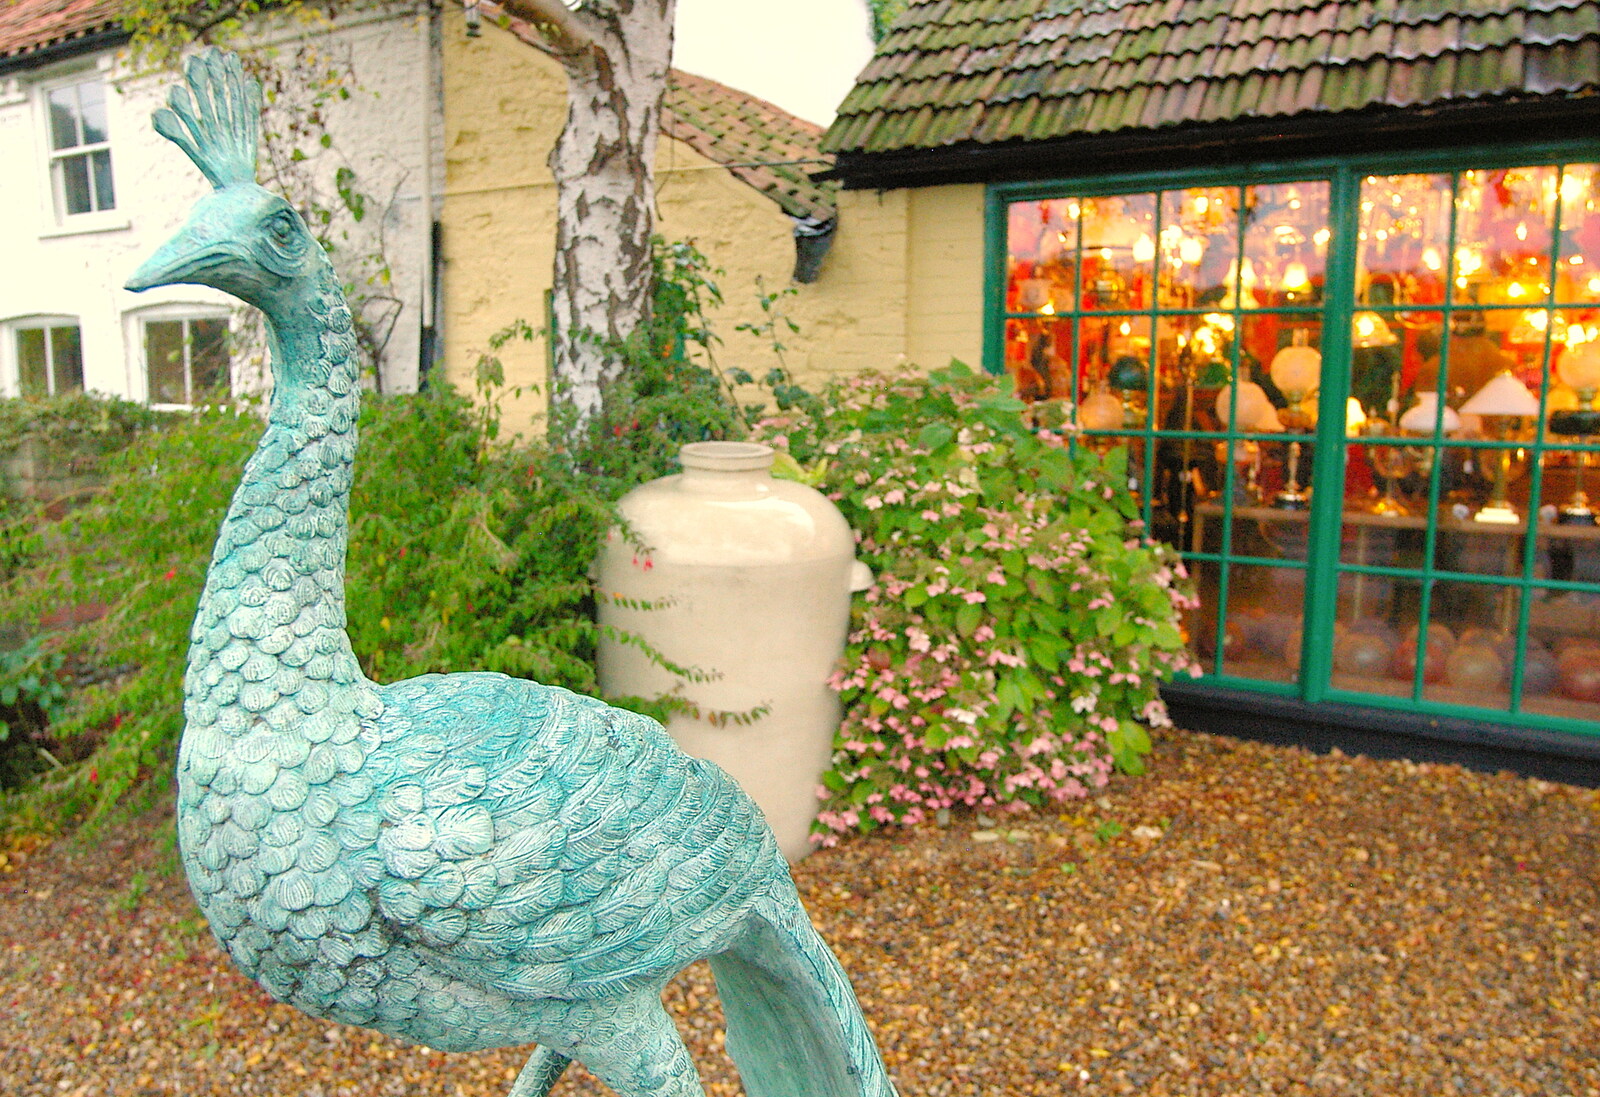 A bronze peacock from Mother, Mike and the Stiffkey Light Shop, Cley and Holkham - 6th November 2005